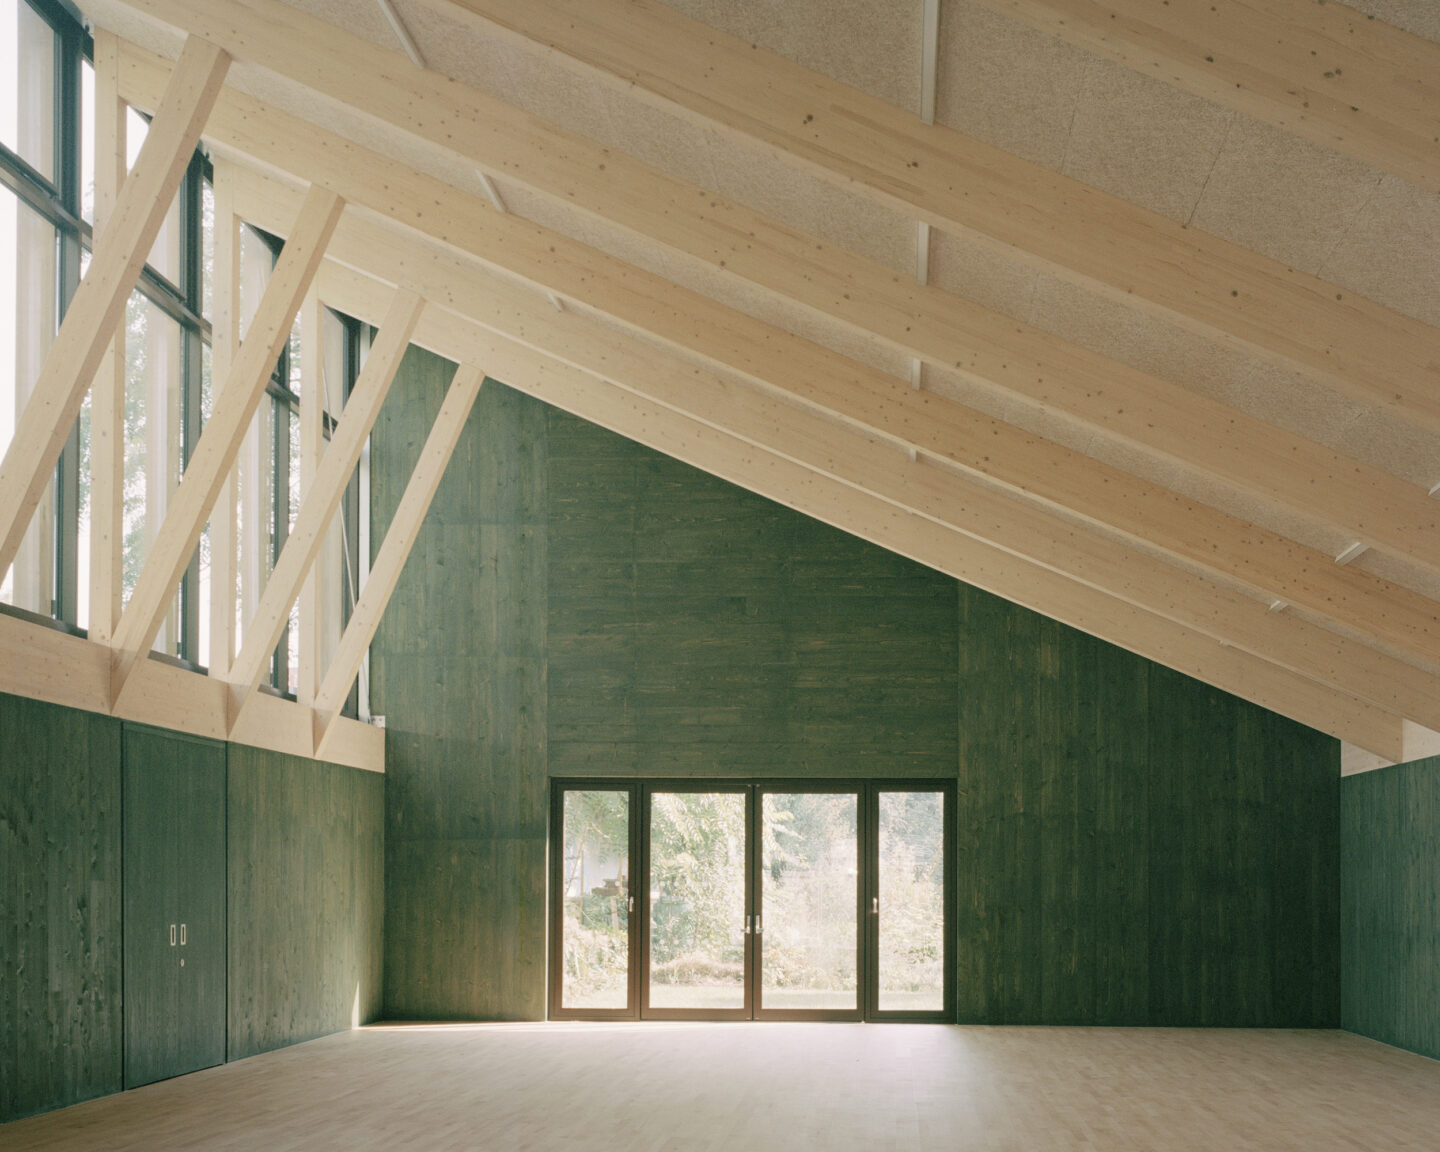 Two projects shortlisted for the Structural Timber Awards 2021